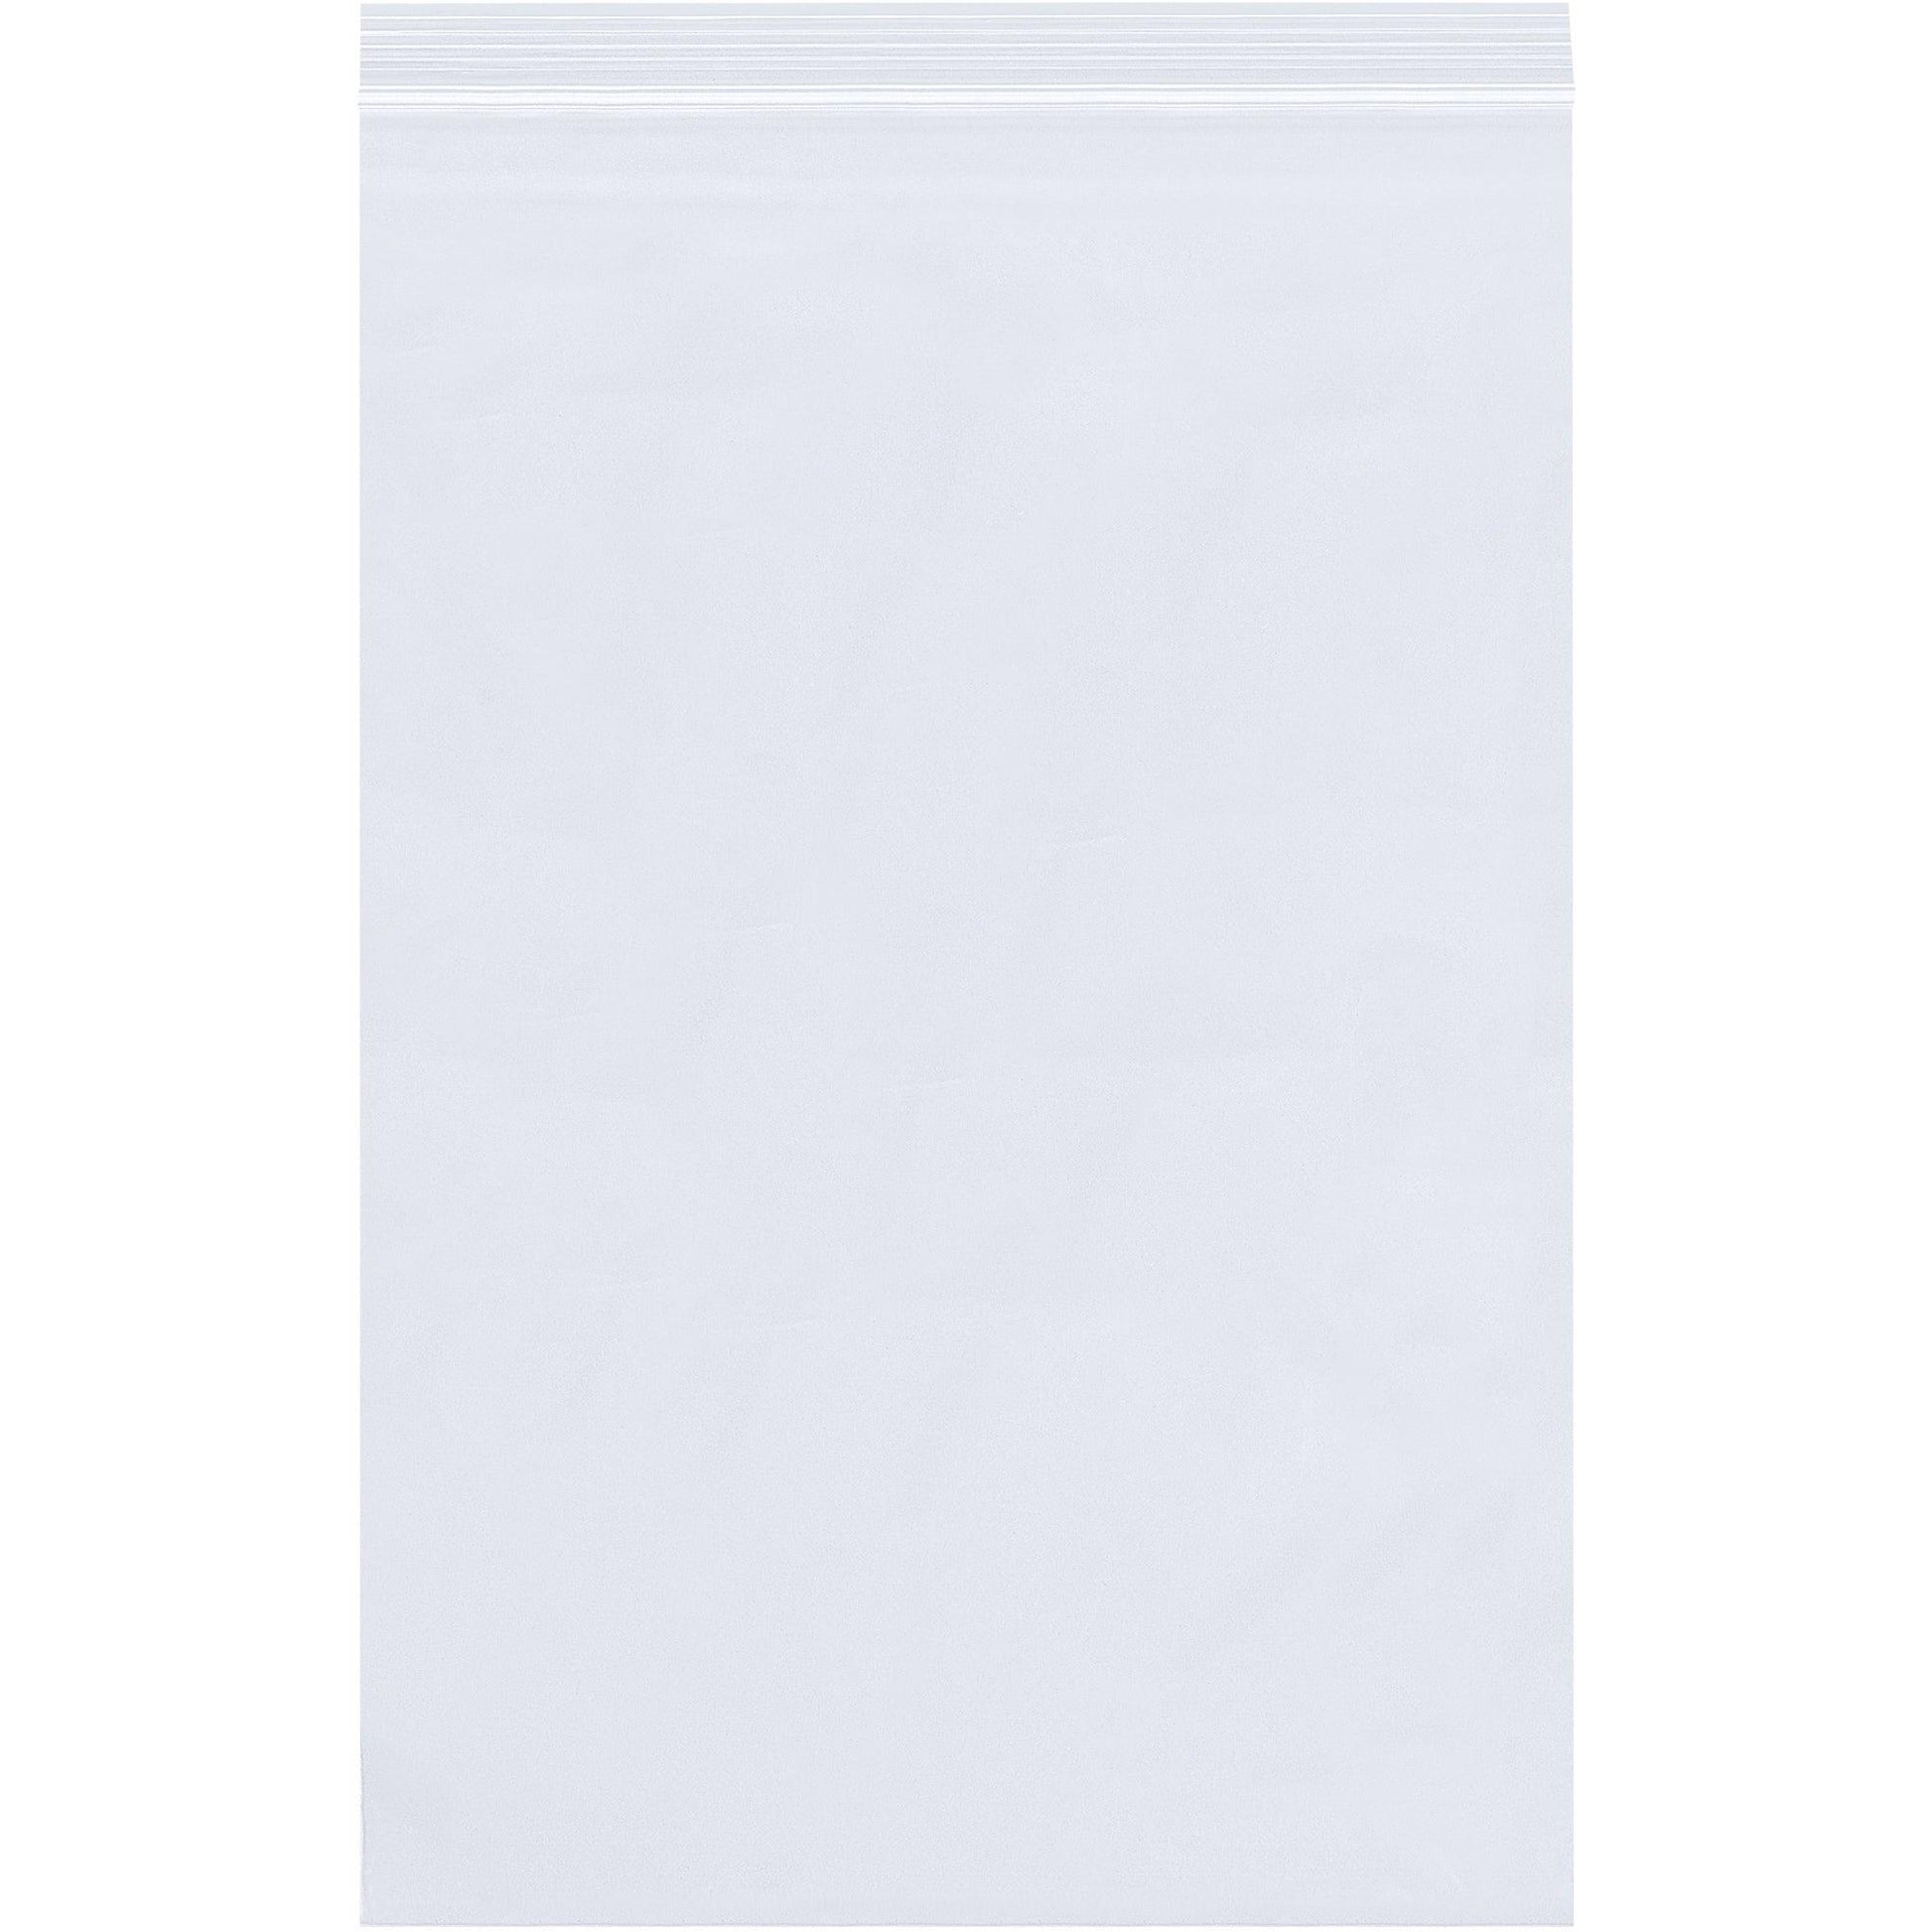 13 x 15" - 4 Mil Reclosable Poly Bags - PB3793